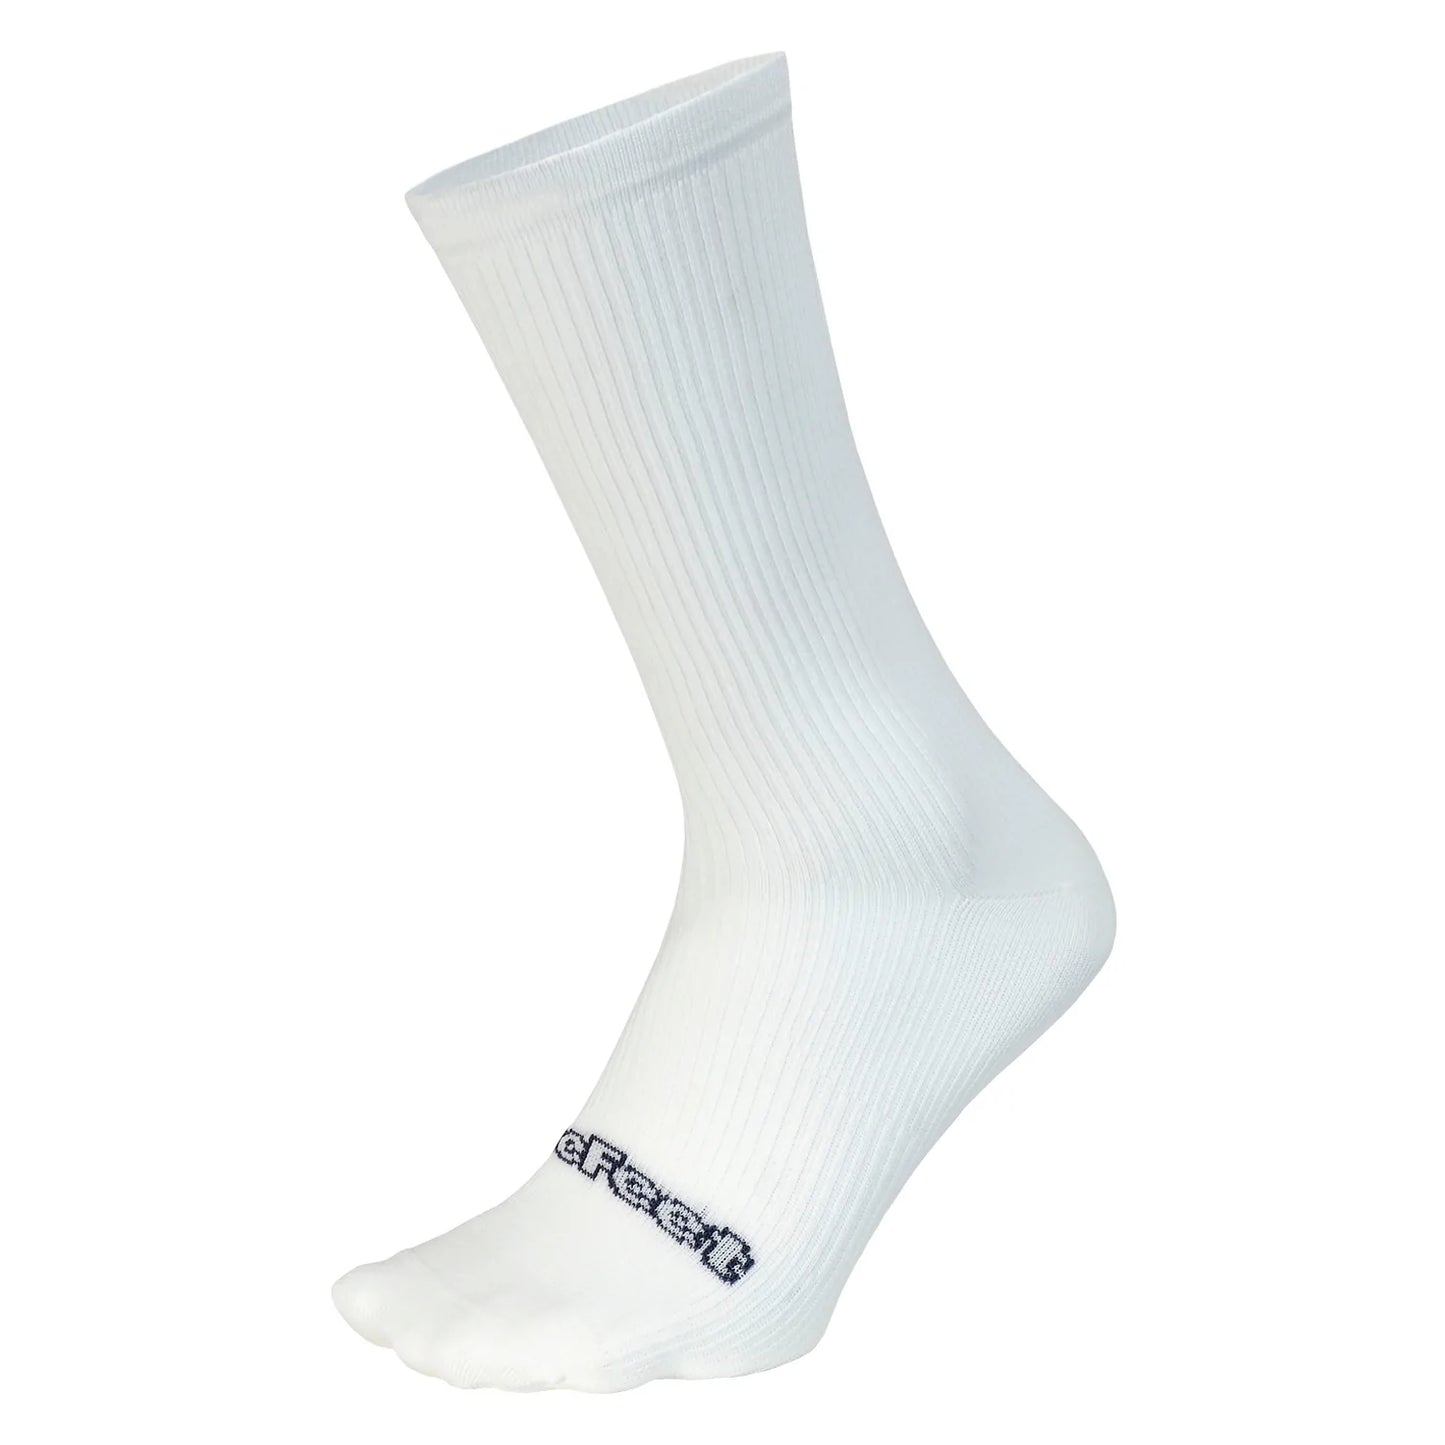 A single white DeFeet cycling sock with a ribbed cuff and foot